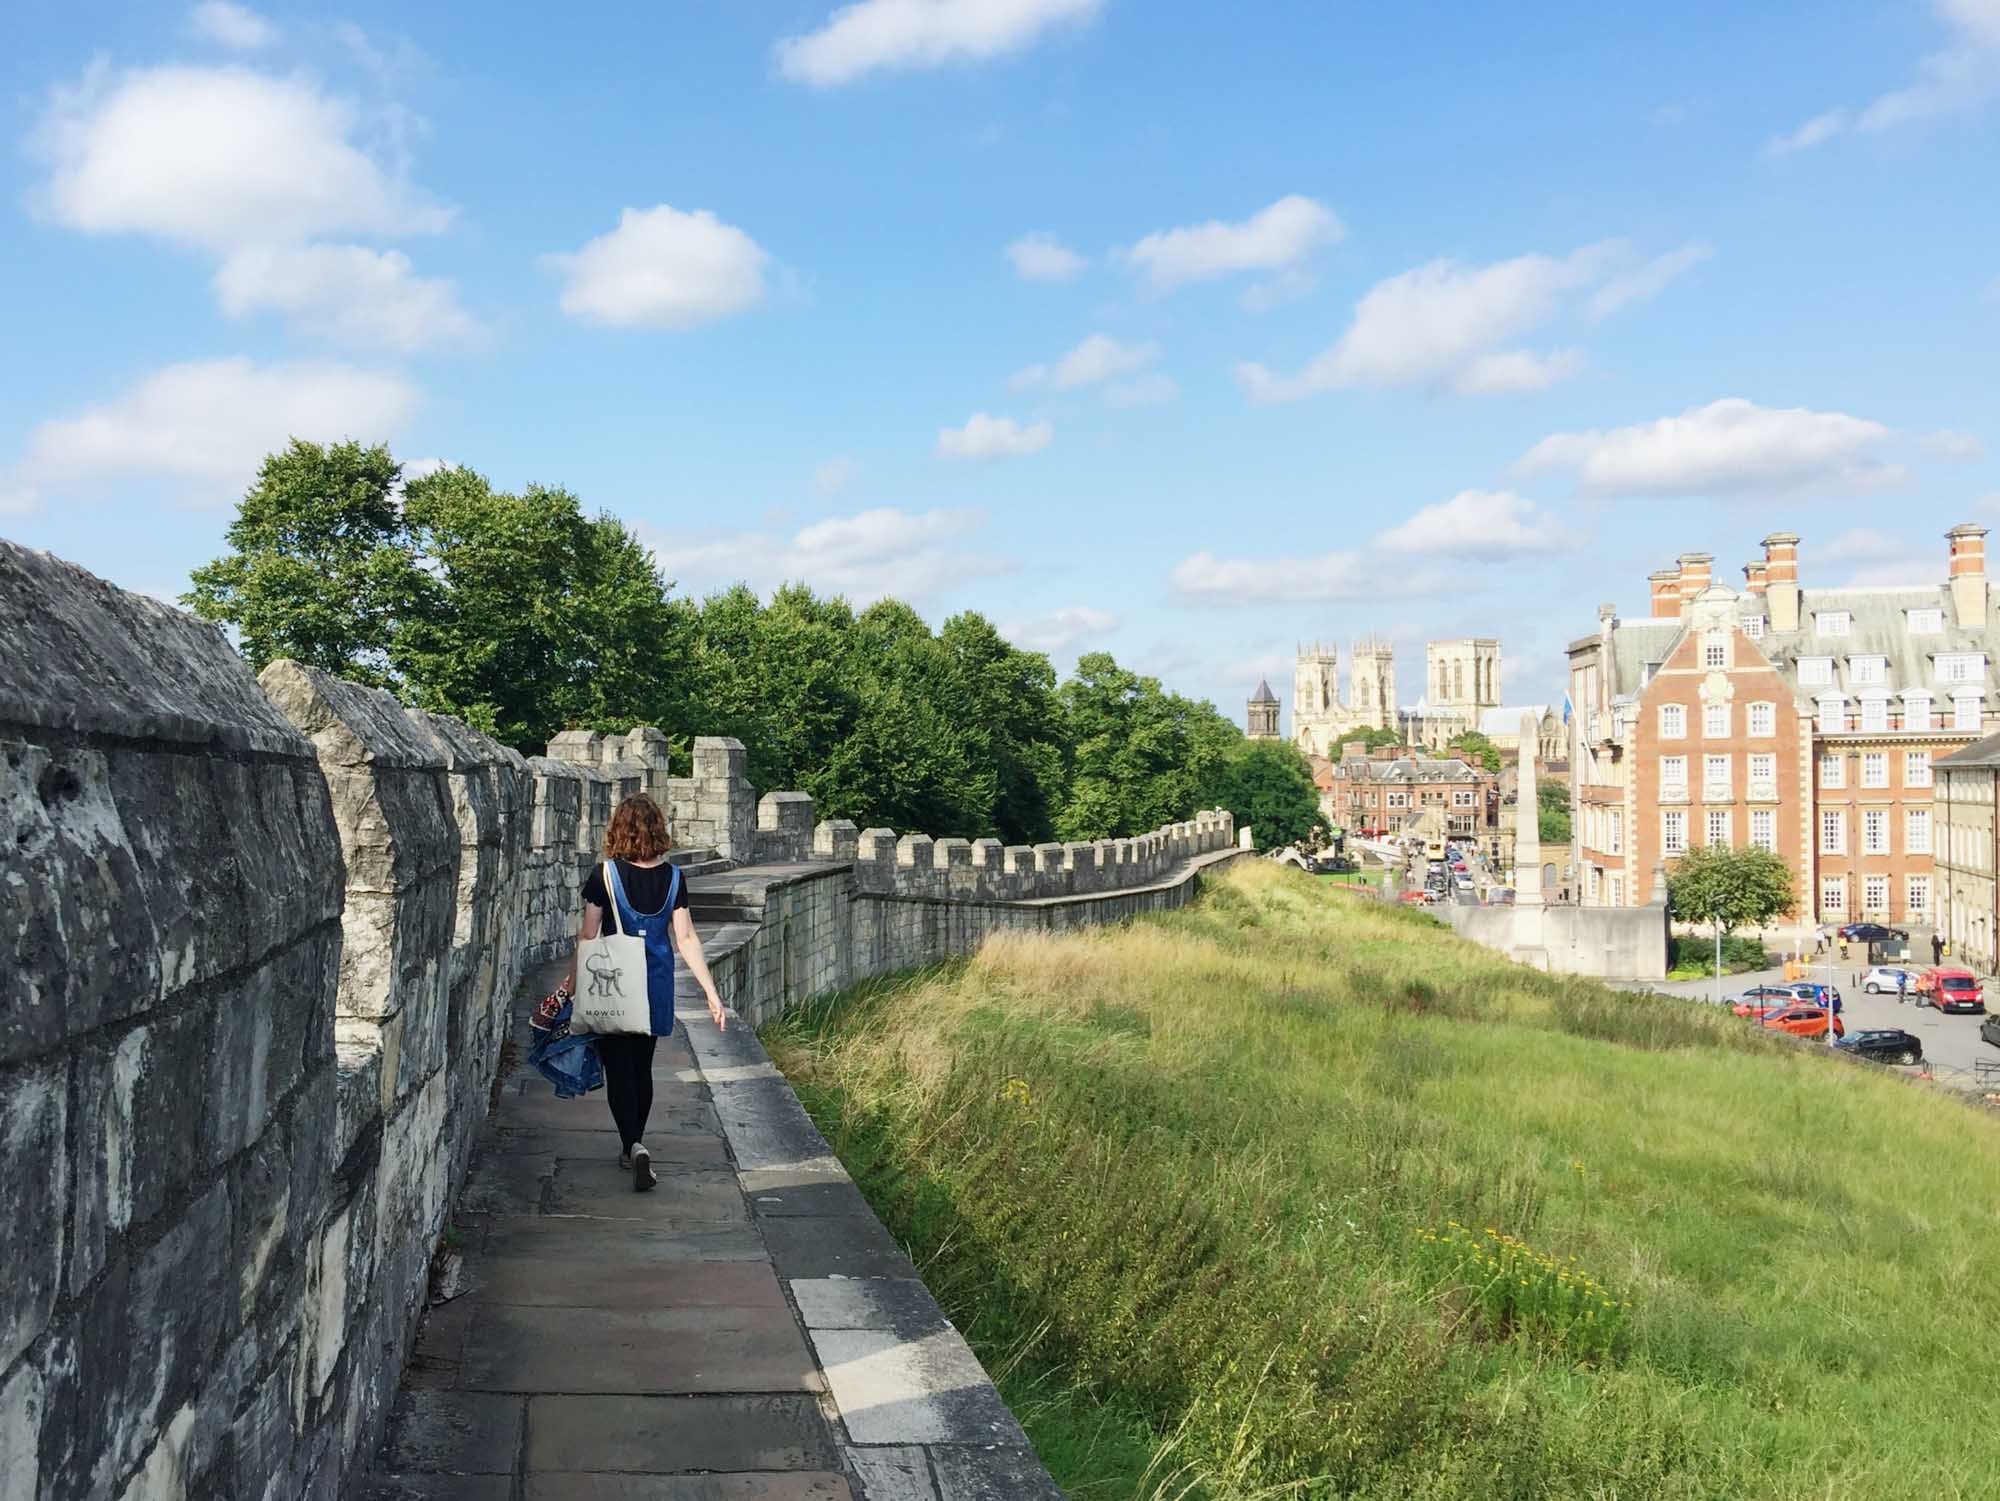 Best things to do in York - York City Walls